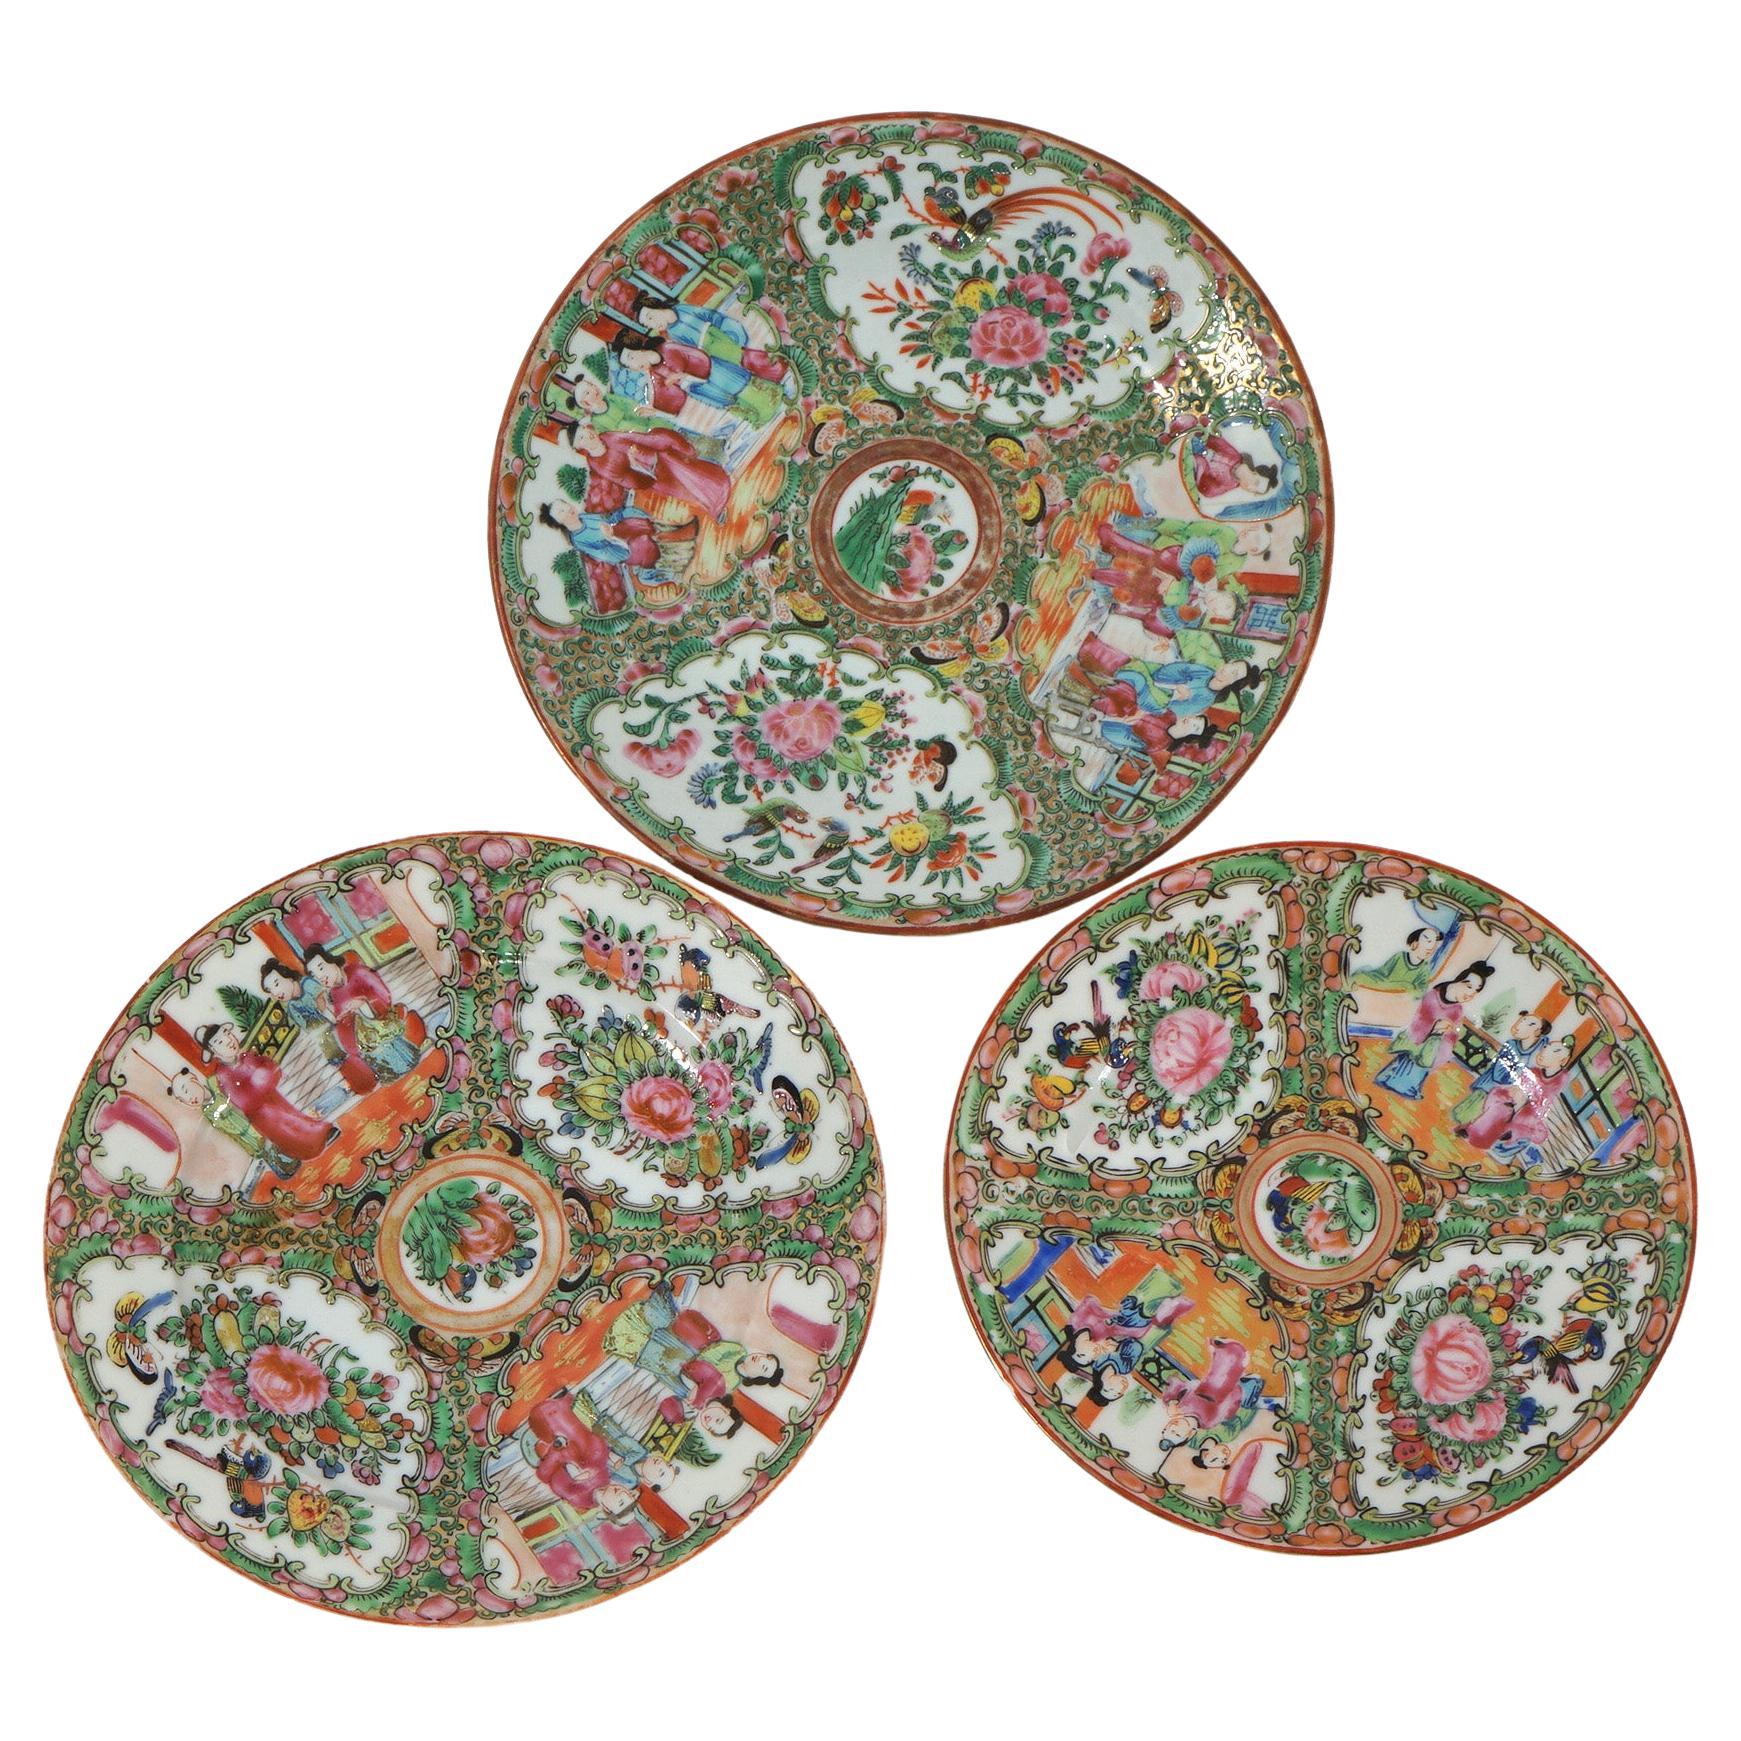 Antique Chinese Rose Medallion Porcelain Plates with Gardens & Figures C1900